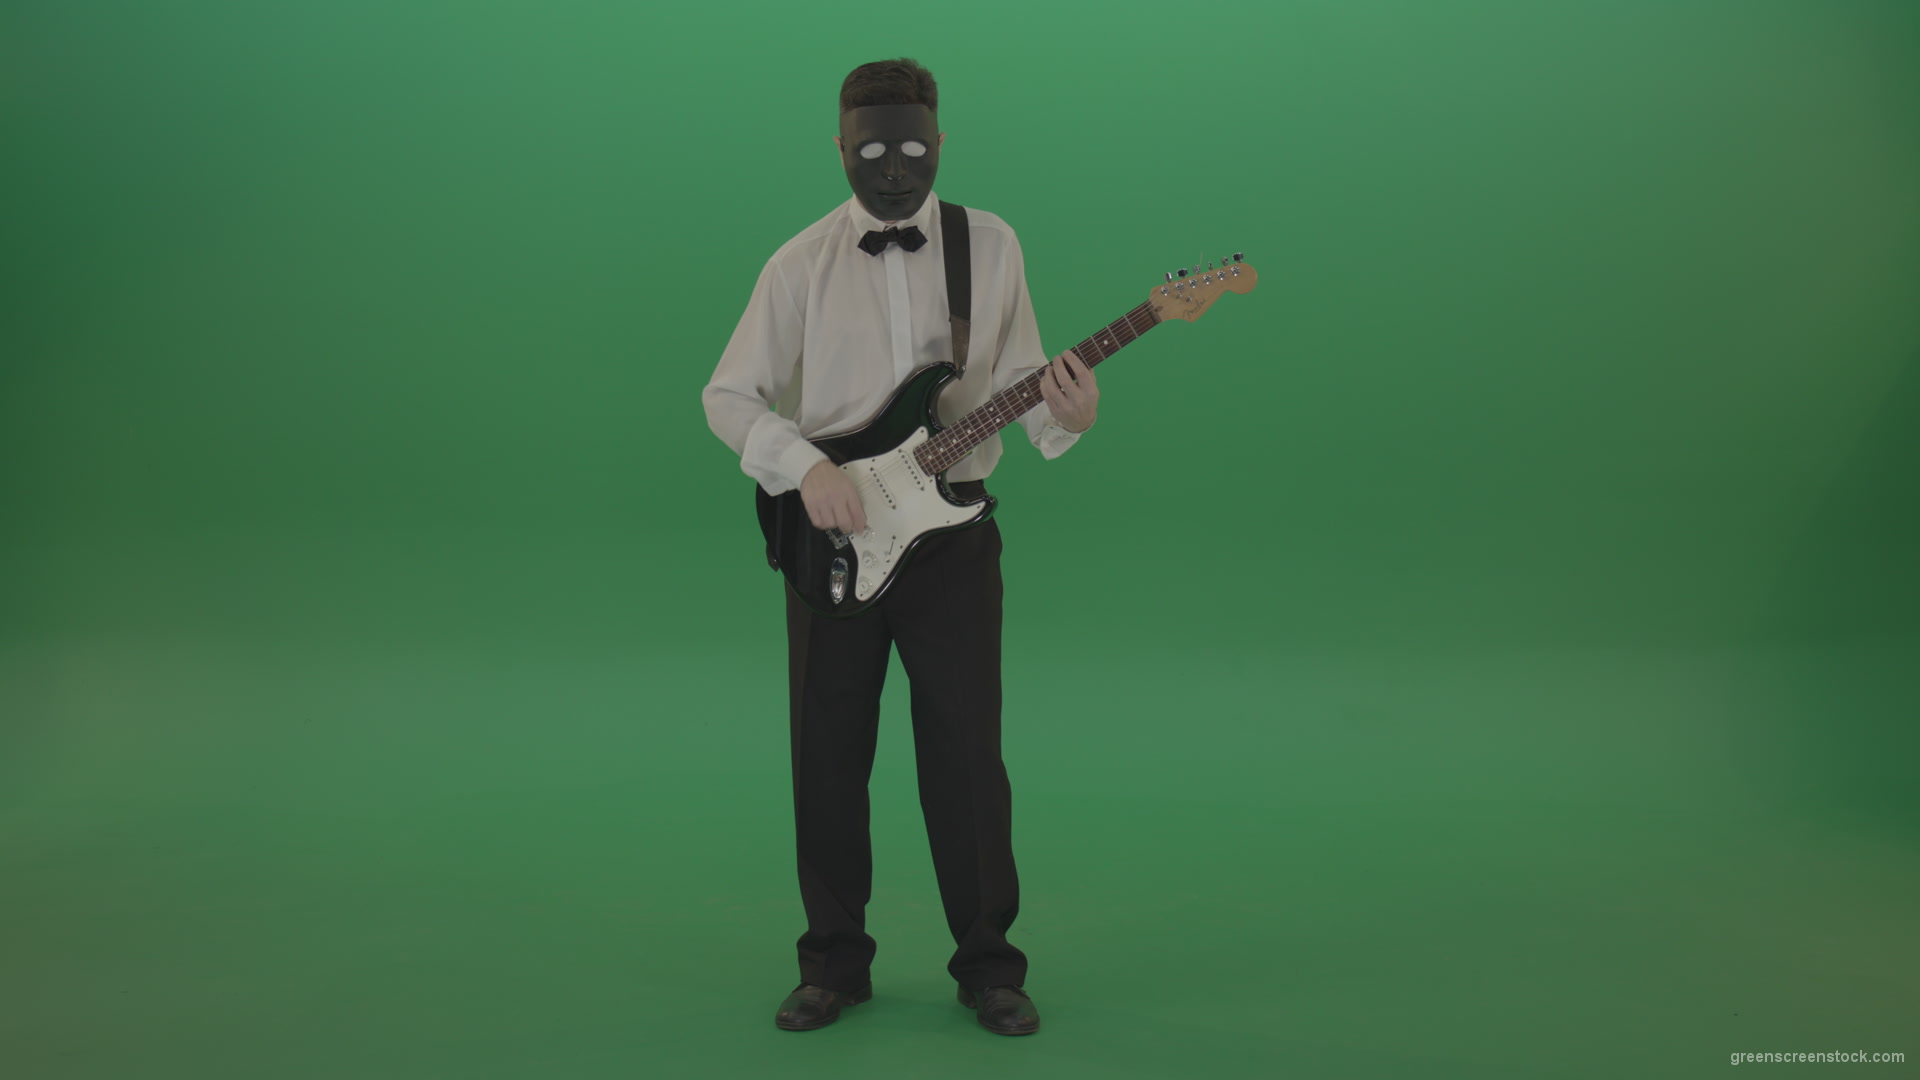 Classic-guitarist-in-white-shirt-play-guitar-in-mask-isolated-on-green-screen_002 Green Screen Stock